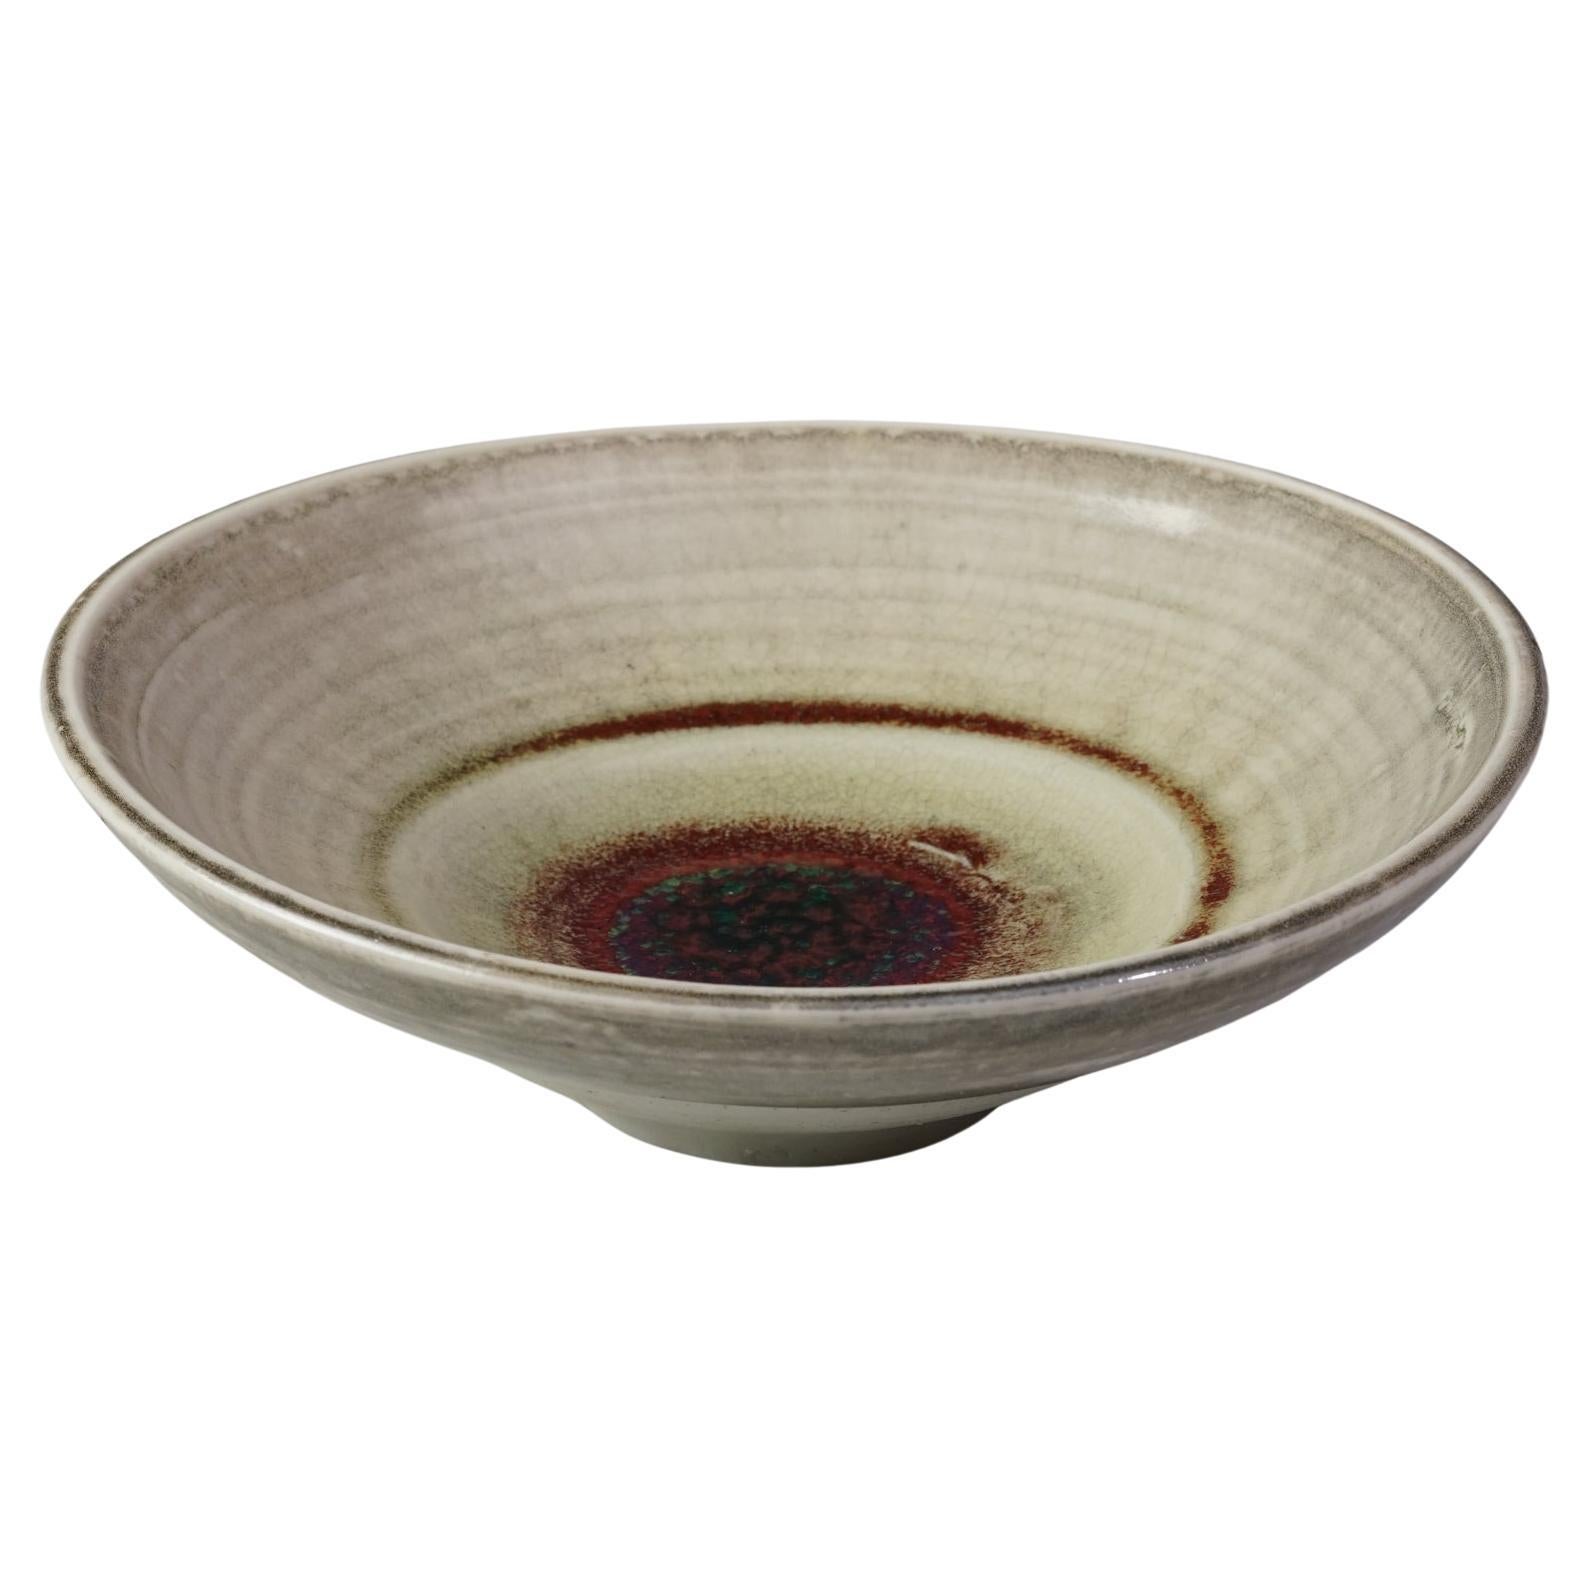 Scandinavian Modern Ceramic Bowl by Aune Siimes for Arabia, 1940s/1950s